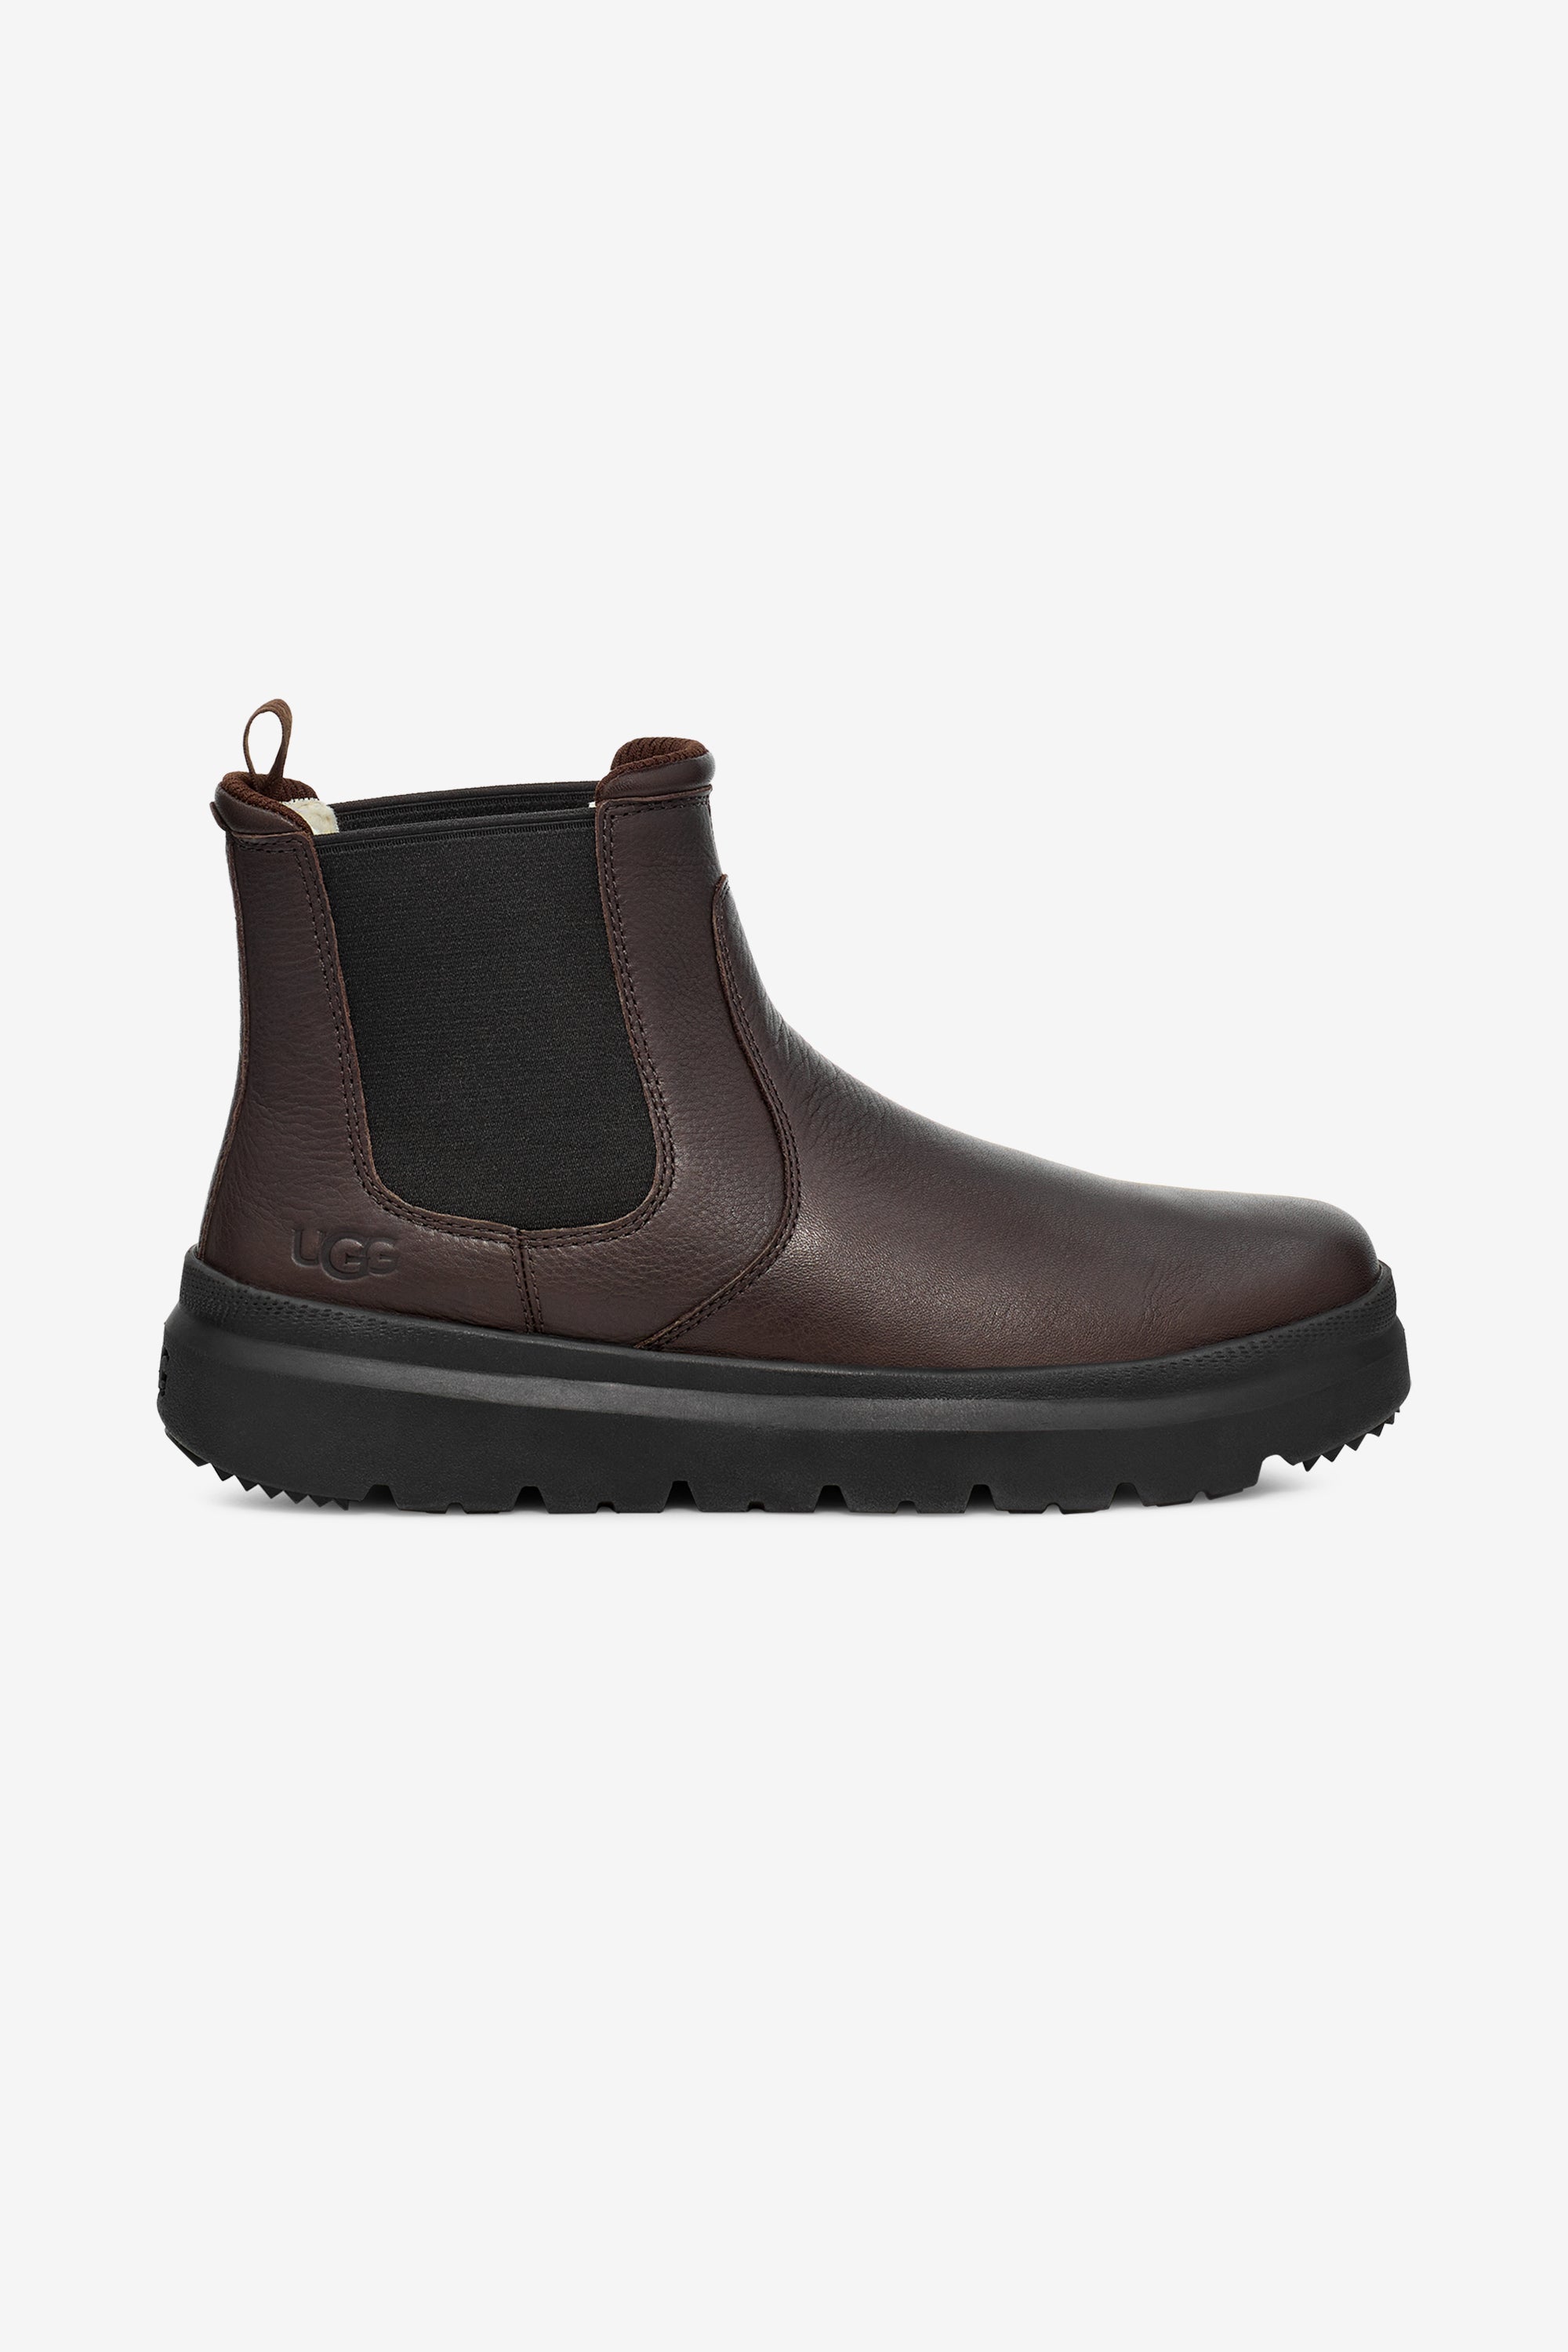 UGG Men's Burleigh Chelsea Boot in Stout – BOUTIQUE TAG